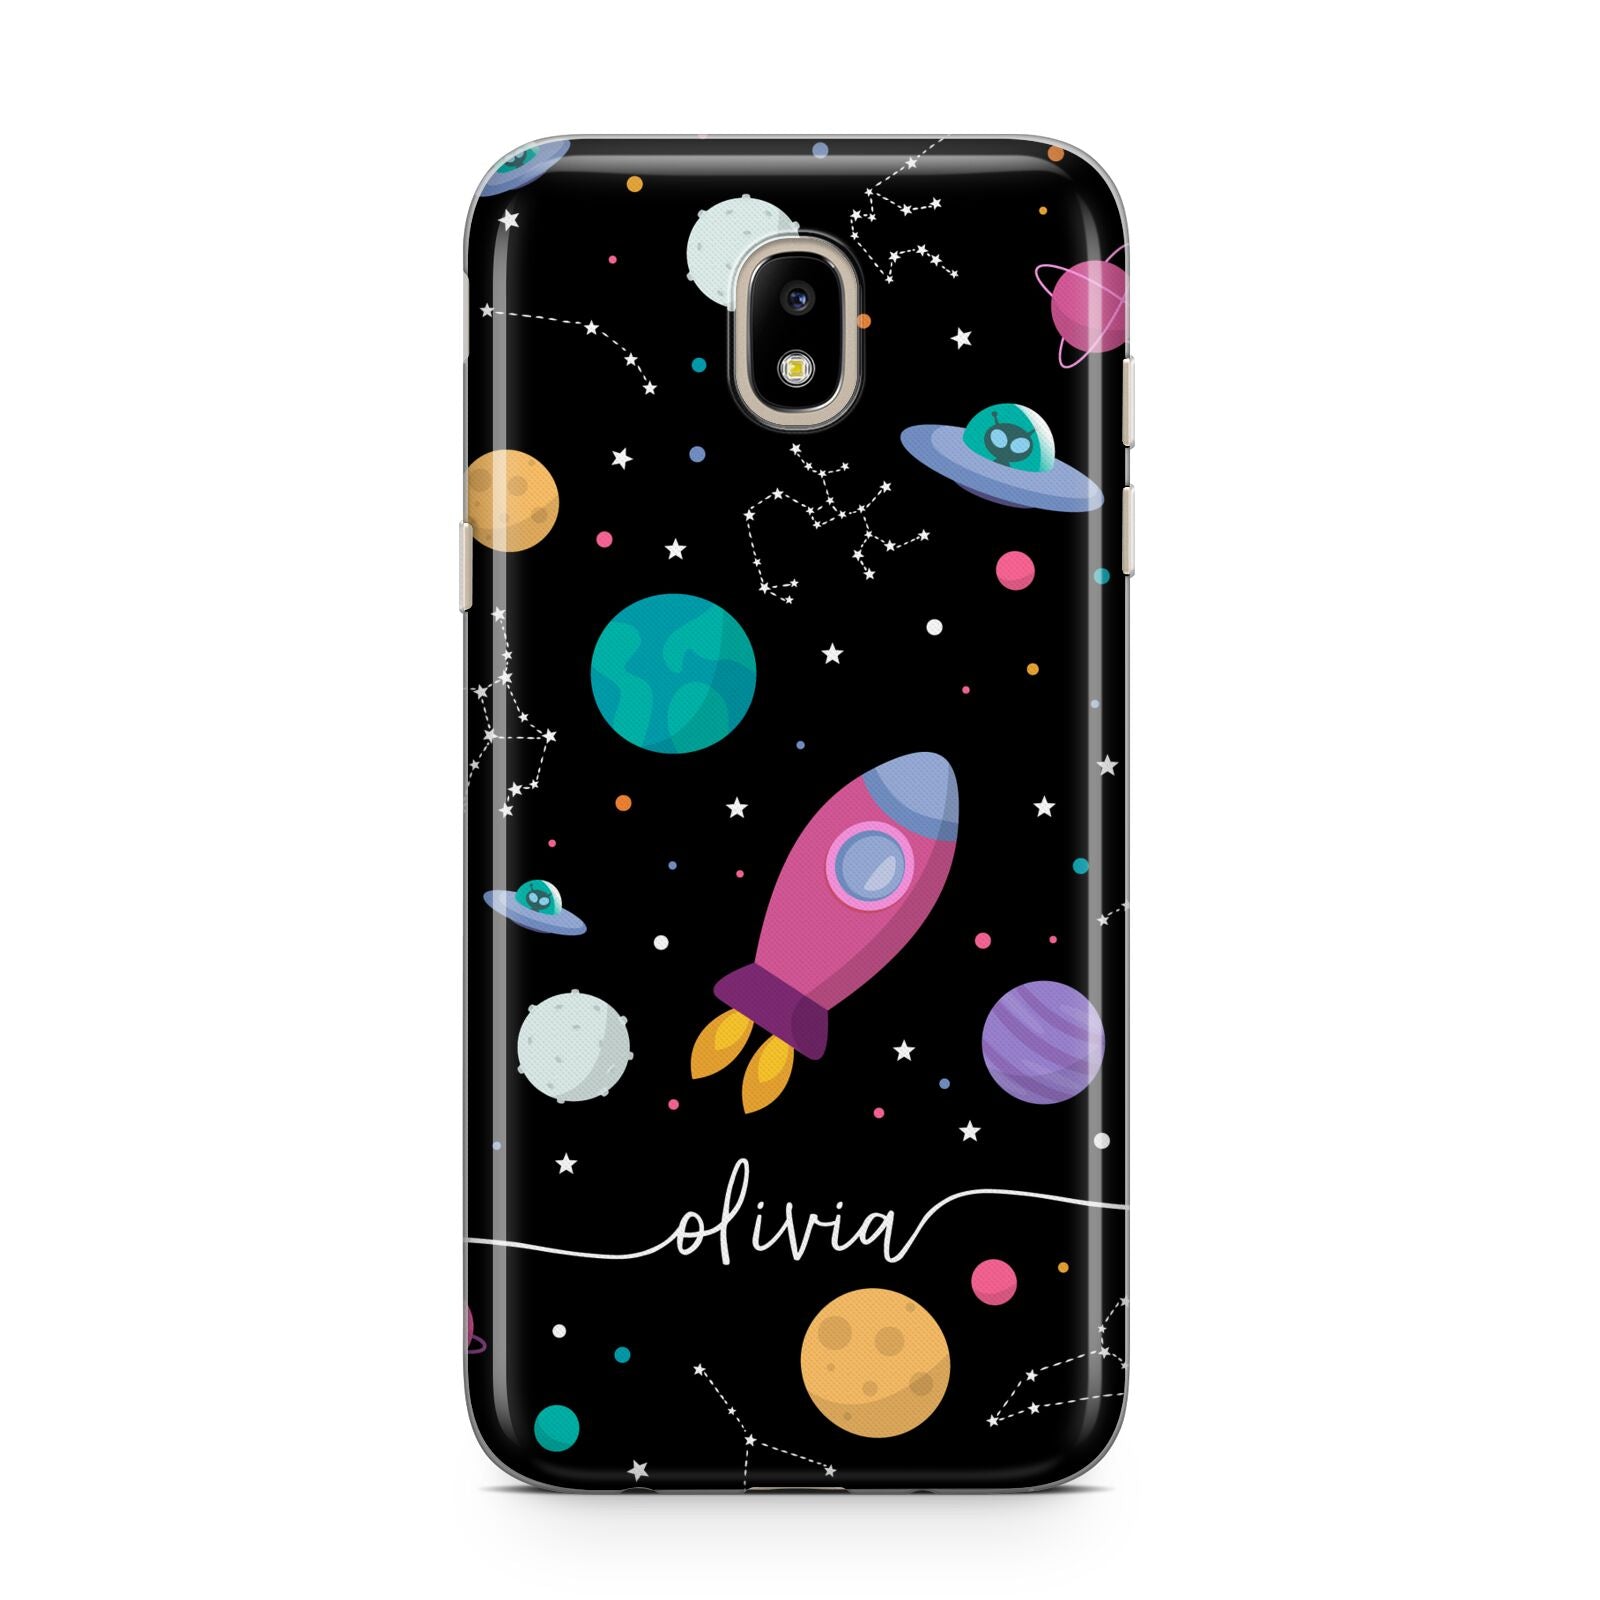 Galaxy Artwork with Name Samsung J5 2017 Case